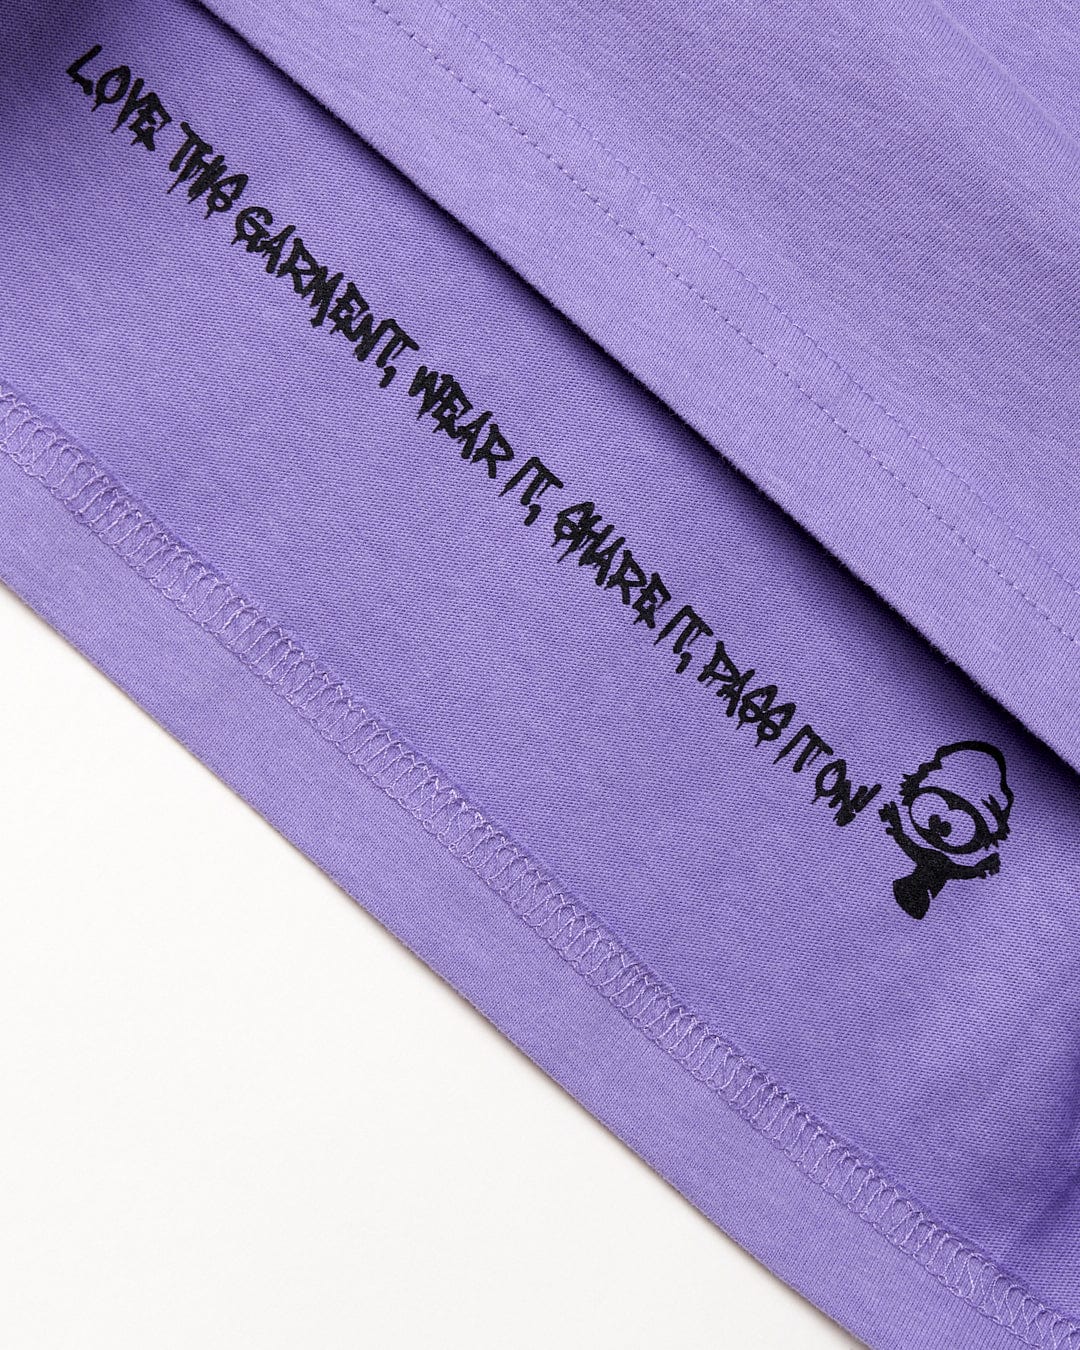 A purple Saltrock Cotton t-shirt with writing on it.